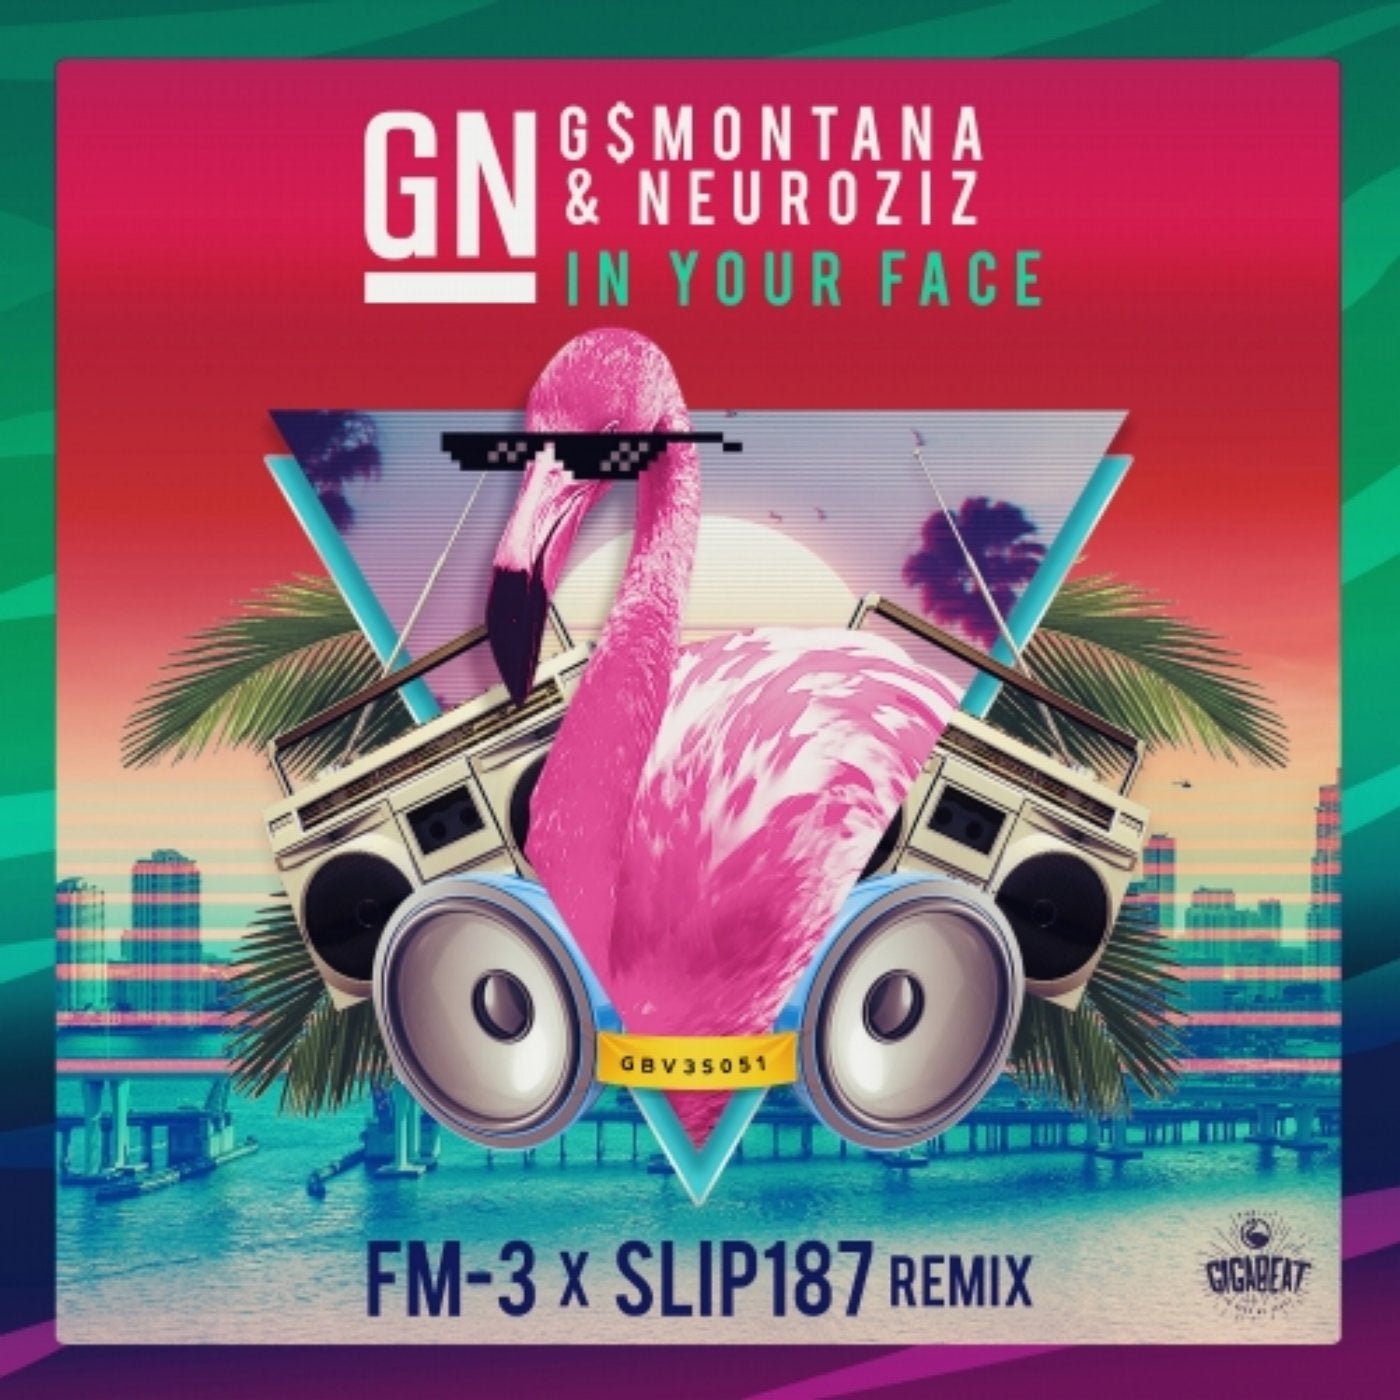 In Your Face (FM-3 x Slip187 Remix)